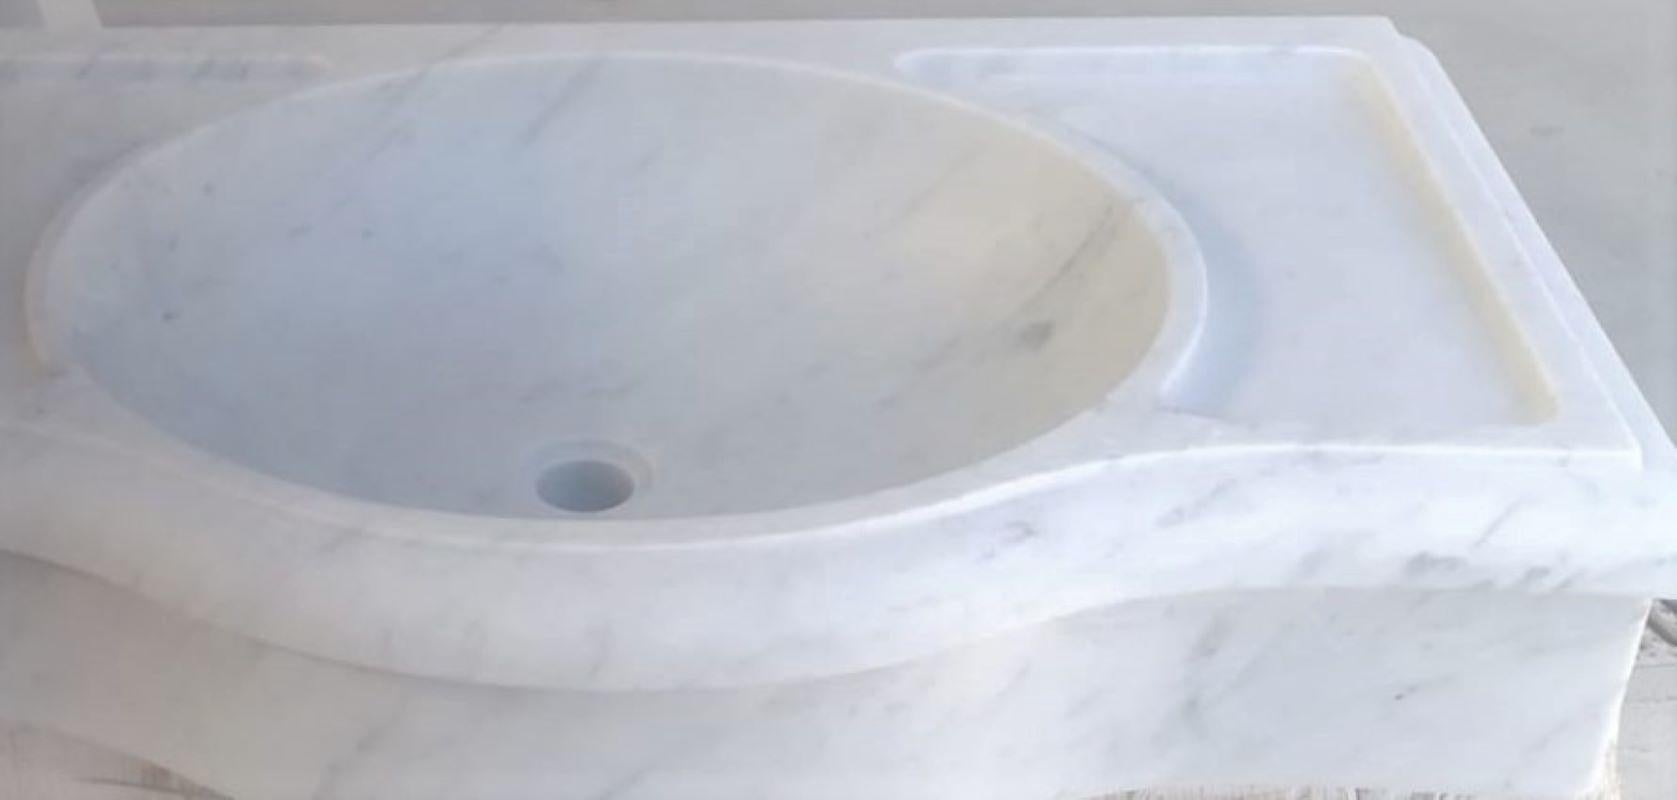 This timeless beautiful Italian classical sink is cut from one single block of white marble, these designs have not changed since Greek and Roman times, it carries superb artistic merit easily fitting in with old and new buildings.
It also makes an